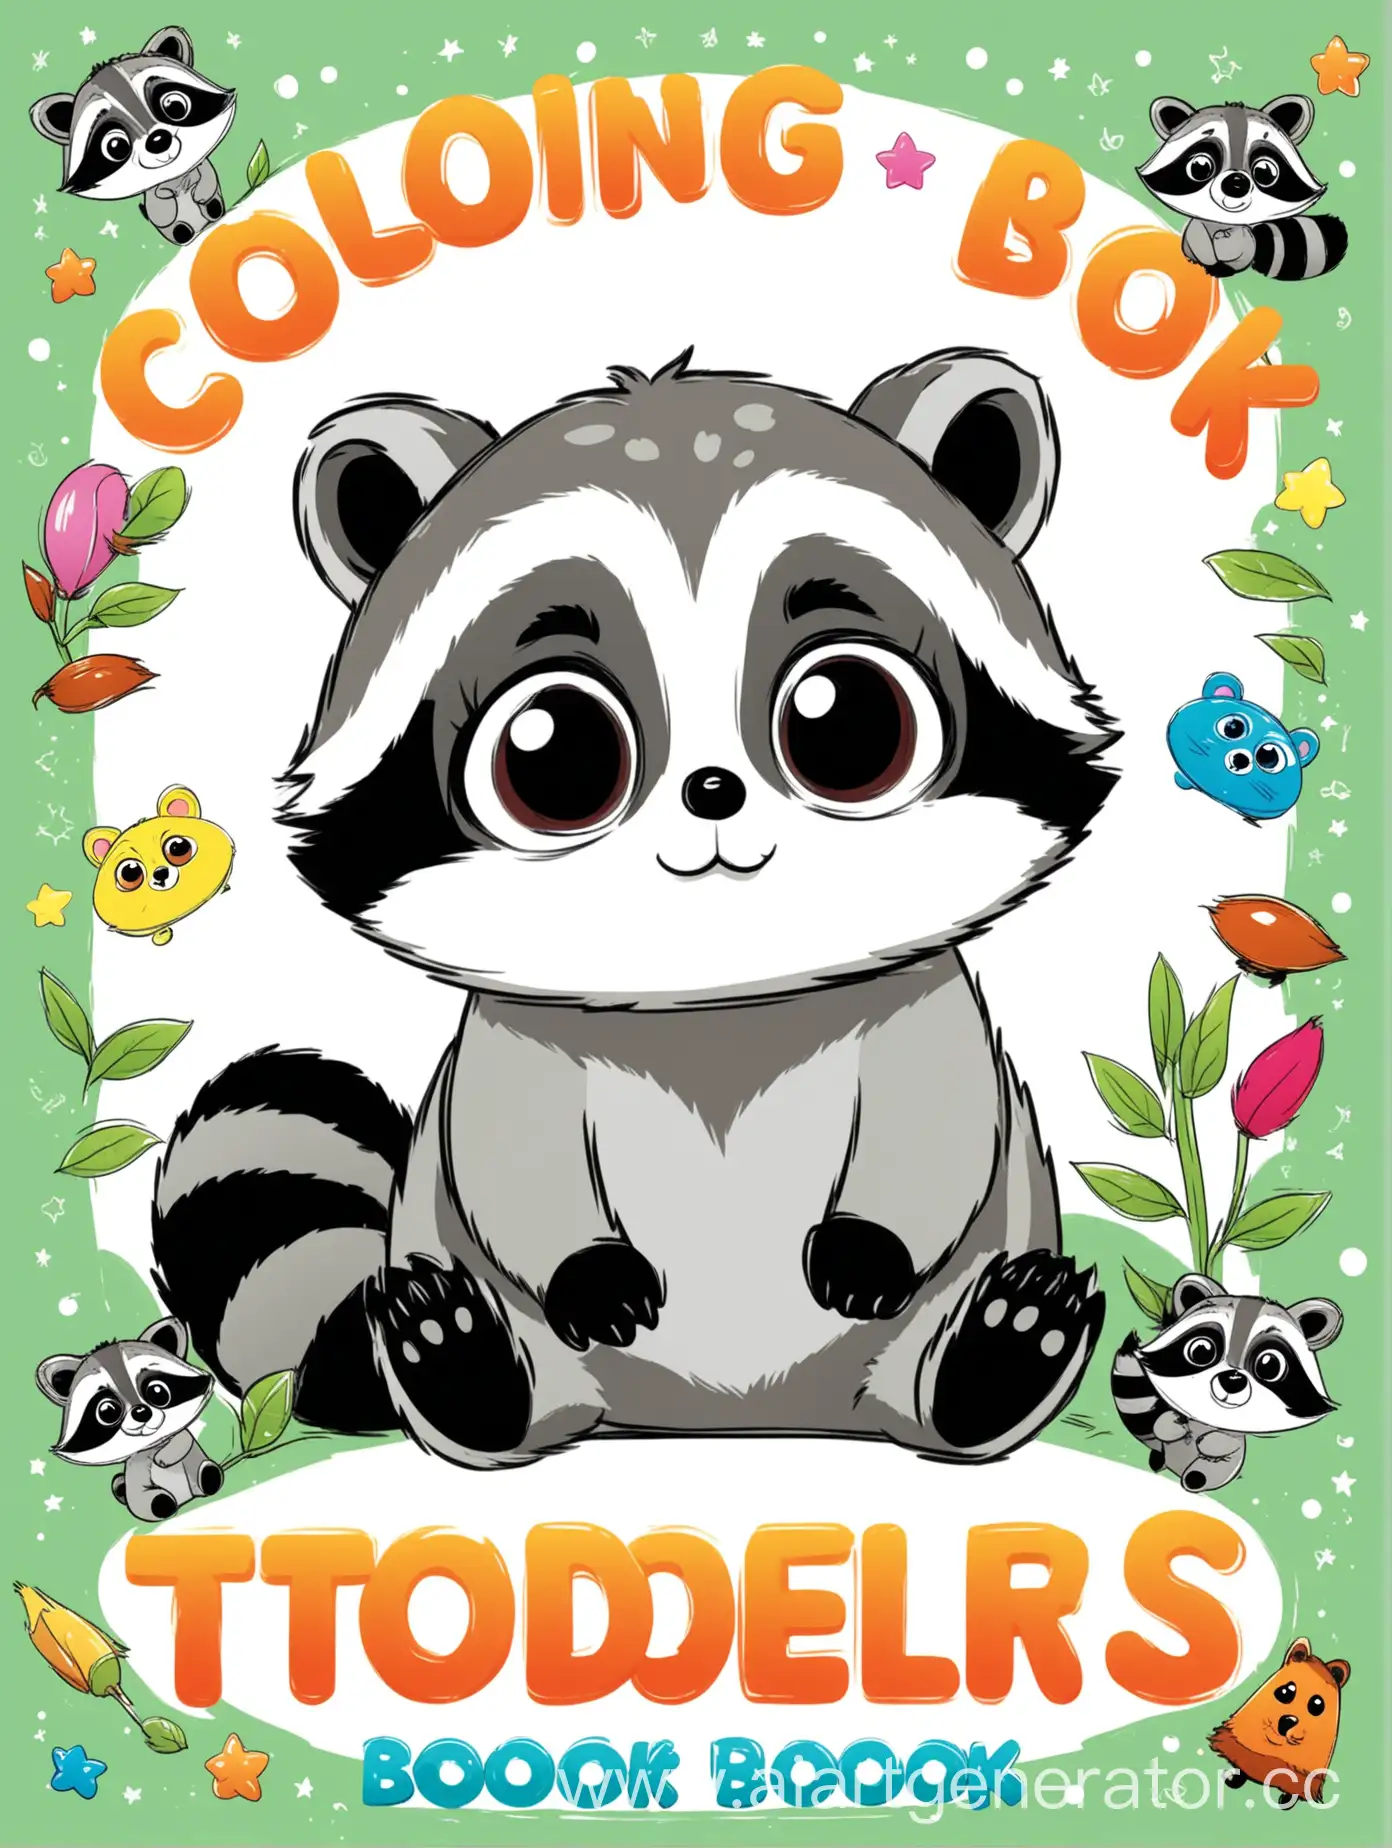 Create a coloring book cover for toddlers in a minimalist style. In the center of the cover should be an image of a cute raccoon with big eyes and a playful expression on its face. The title of the book "Coloring Book for Toddlers" should be written at the top of the cover in large and attractive font.